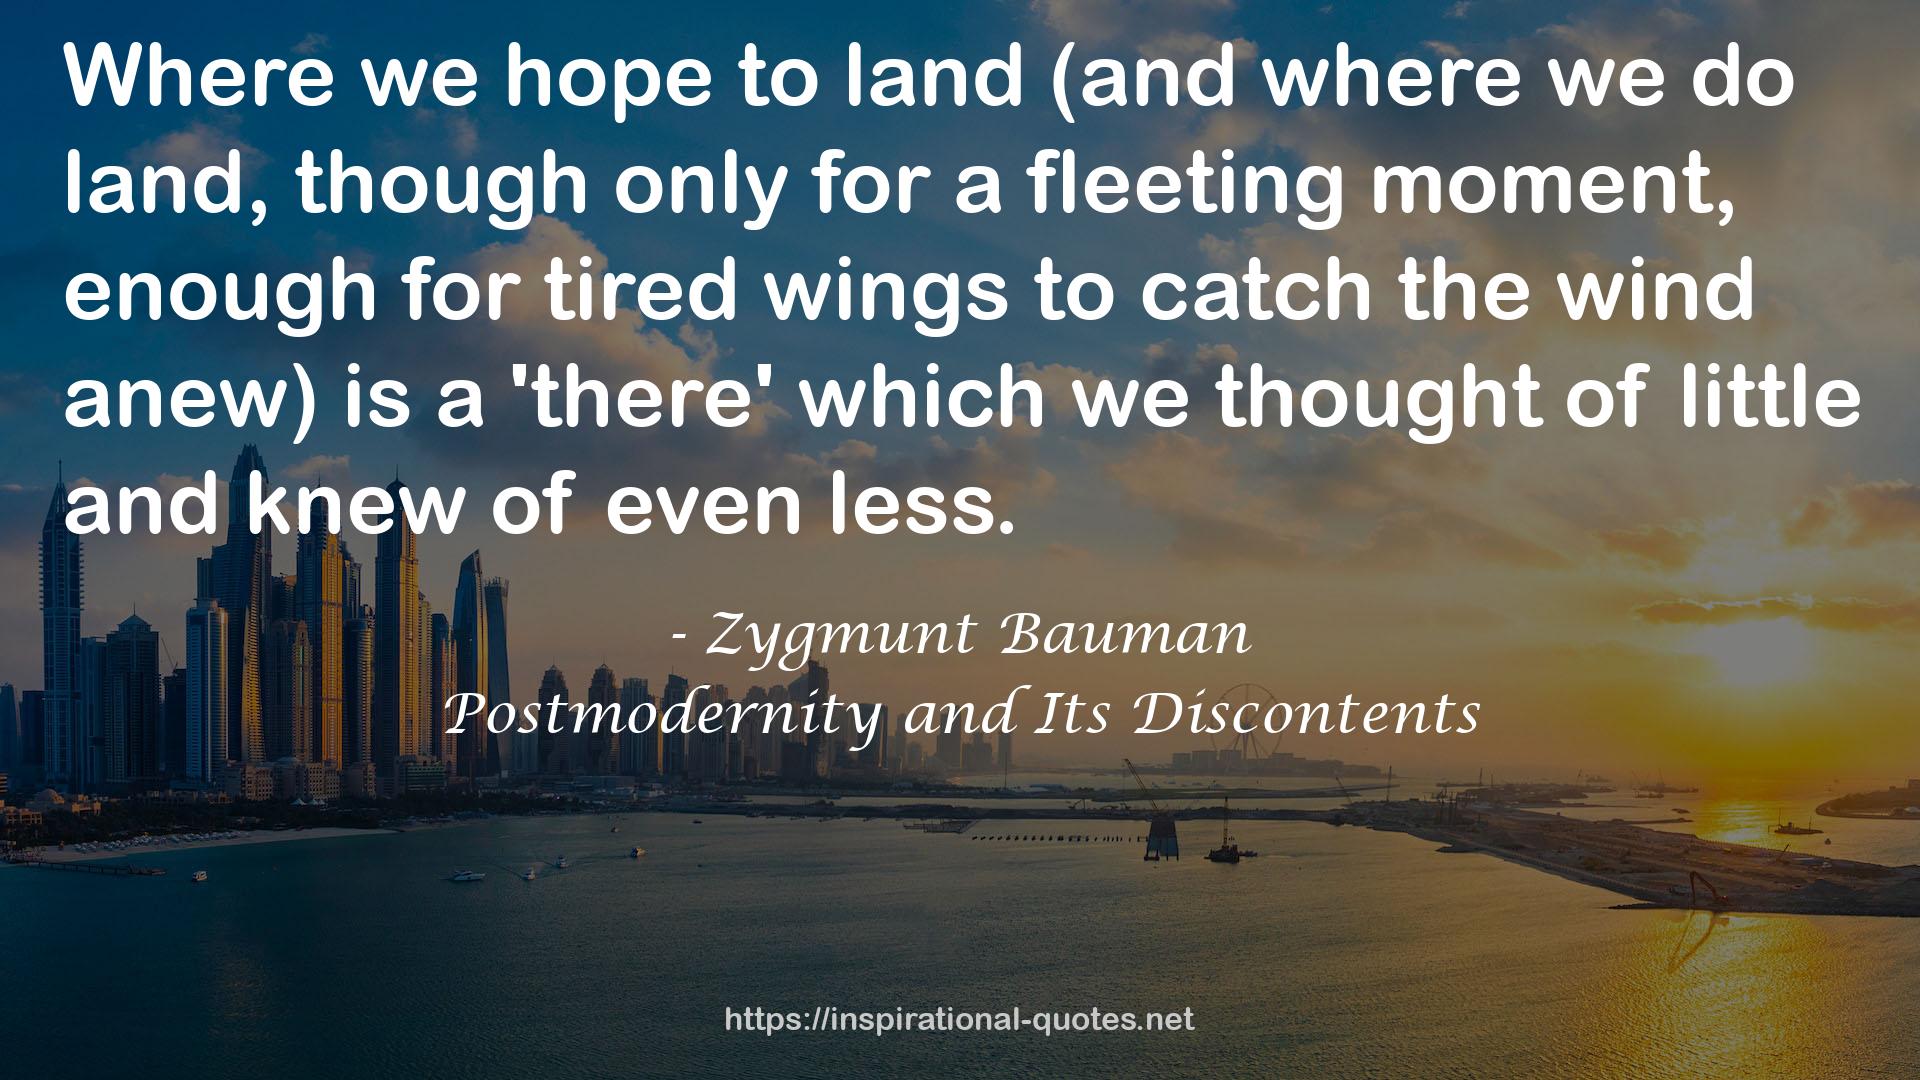 Postmodernity and Its Discontents QUOTES